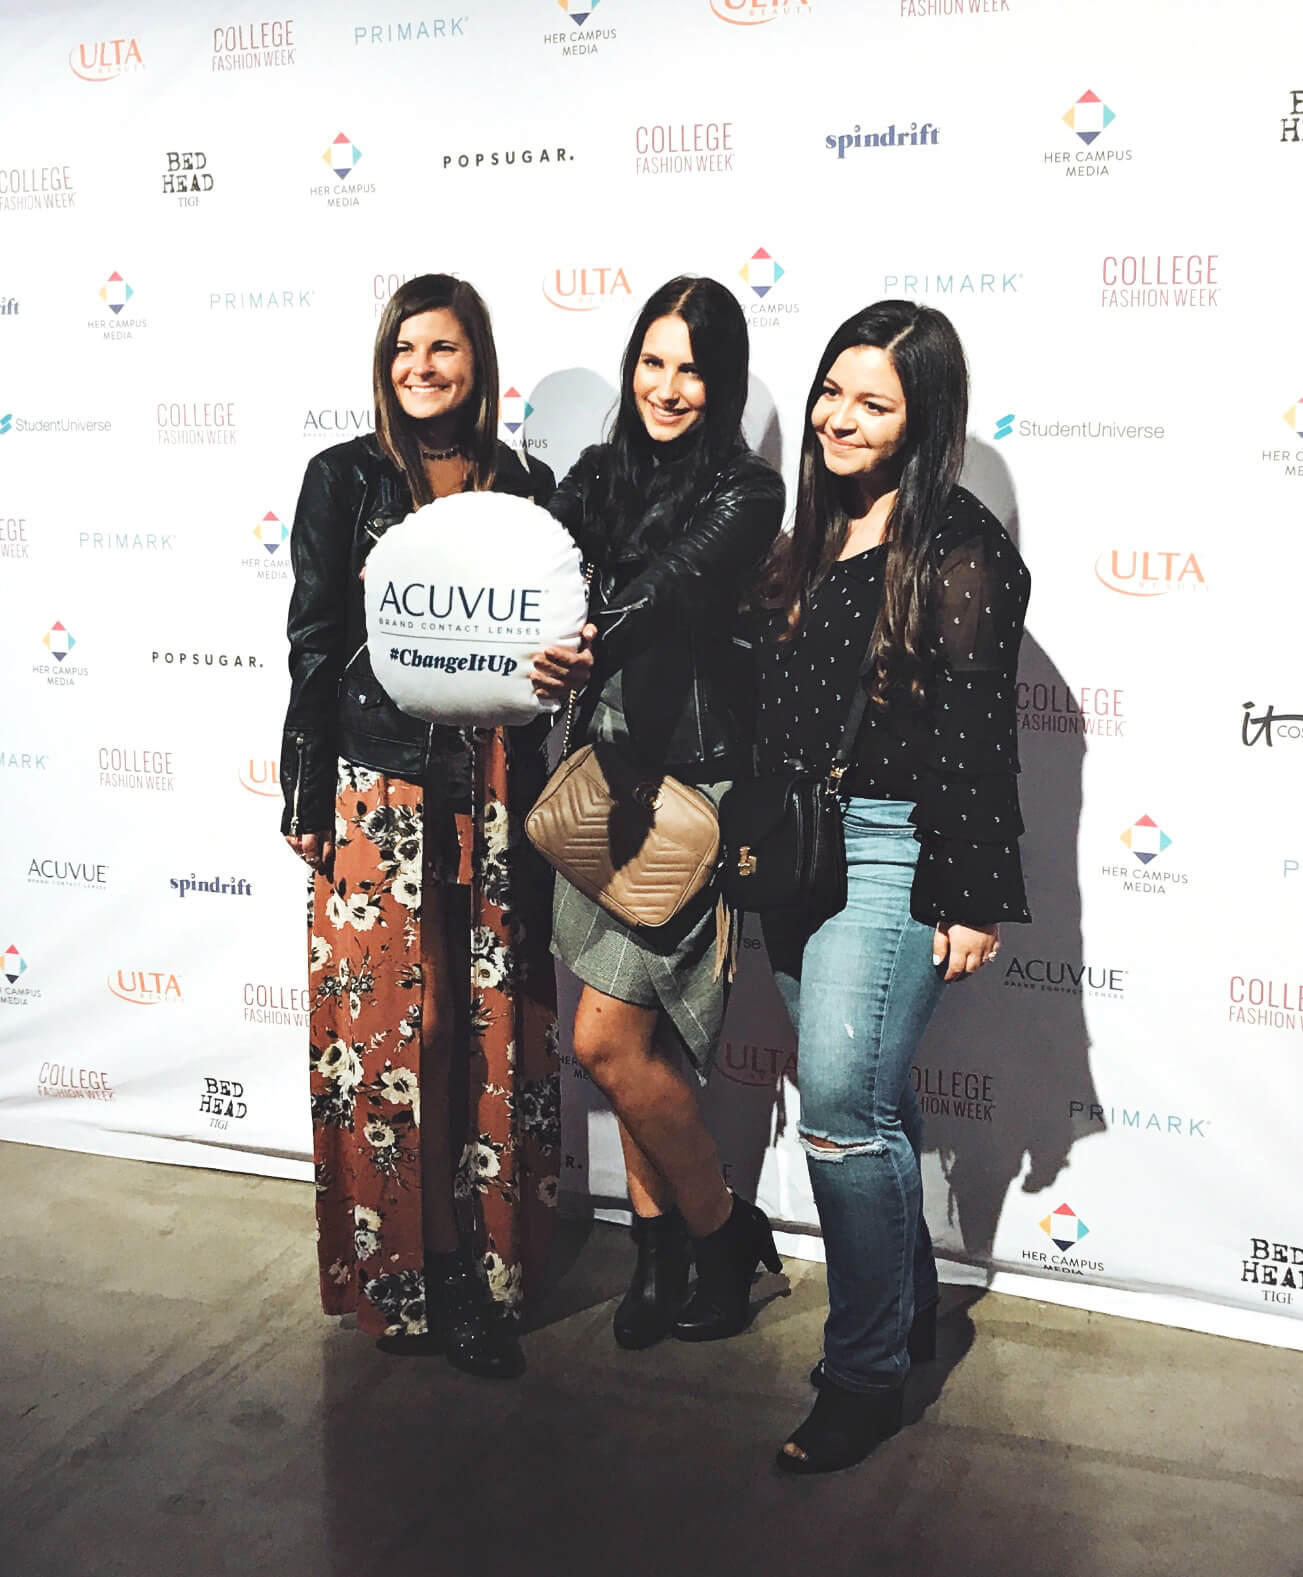 Influencer Event, HerCampus College Fashion Week, Acuvue, Tilden of To Be Bright